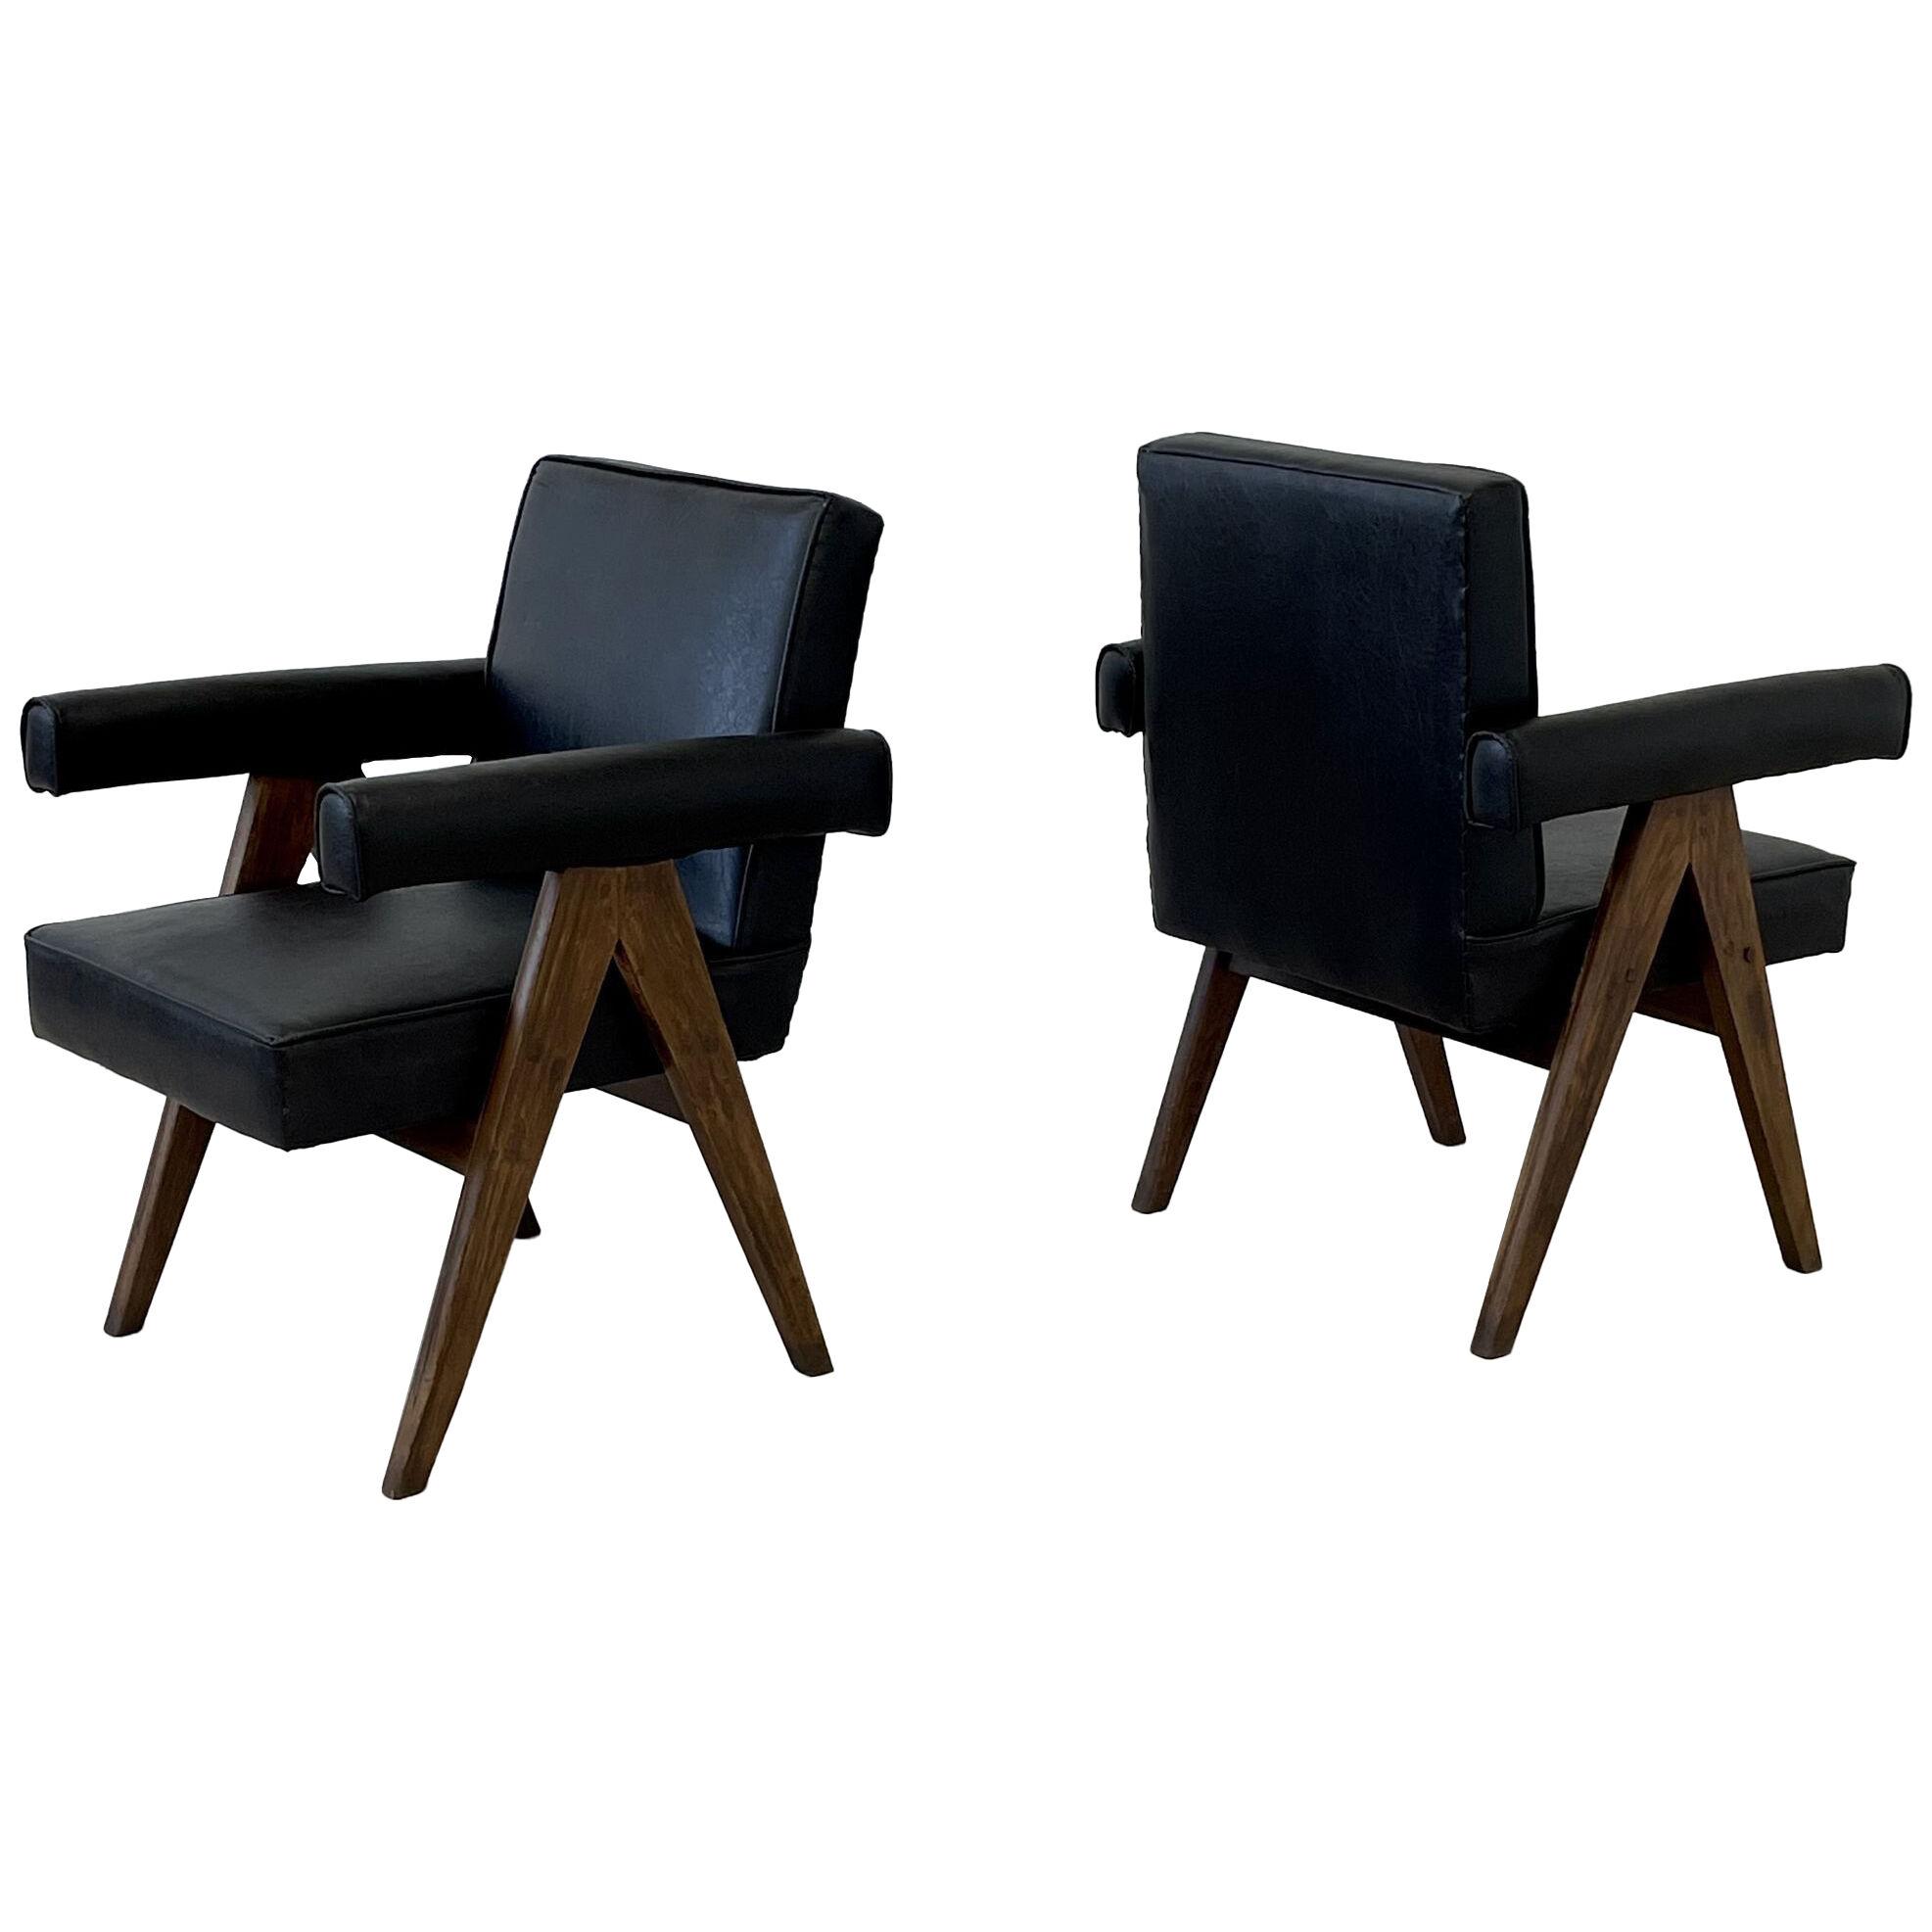 Pair of Authentic Pierre Jeanneret Committee Chairs, Mid-Century Modern, Teak